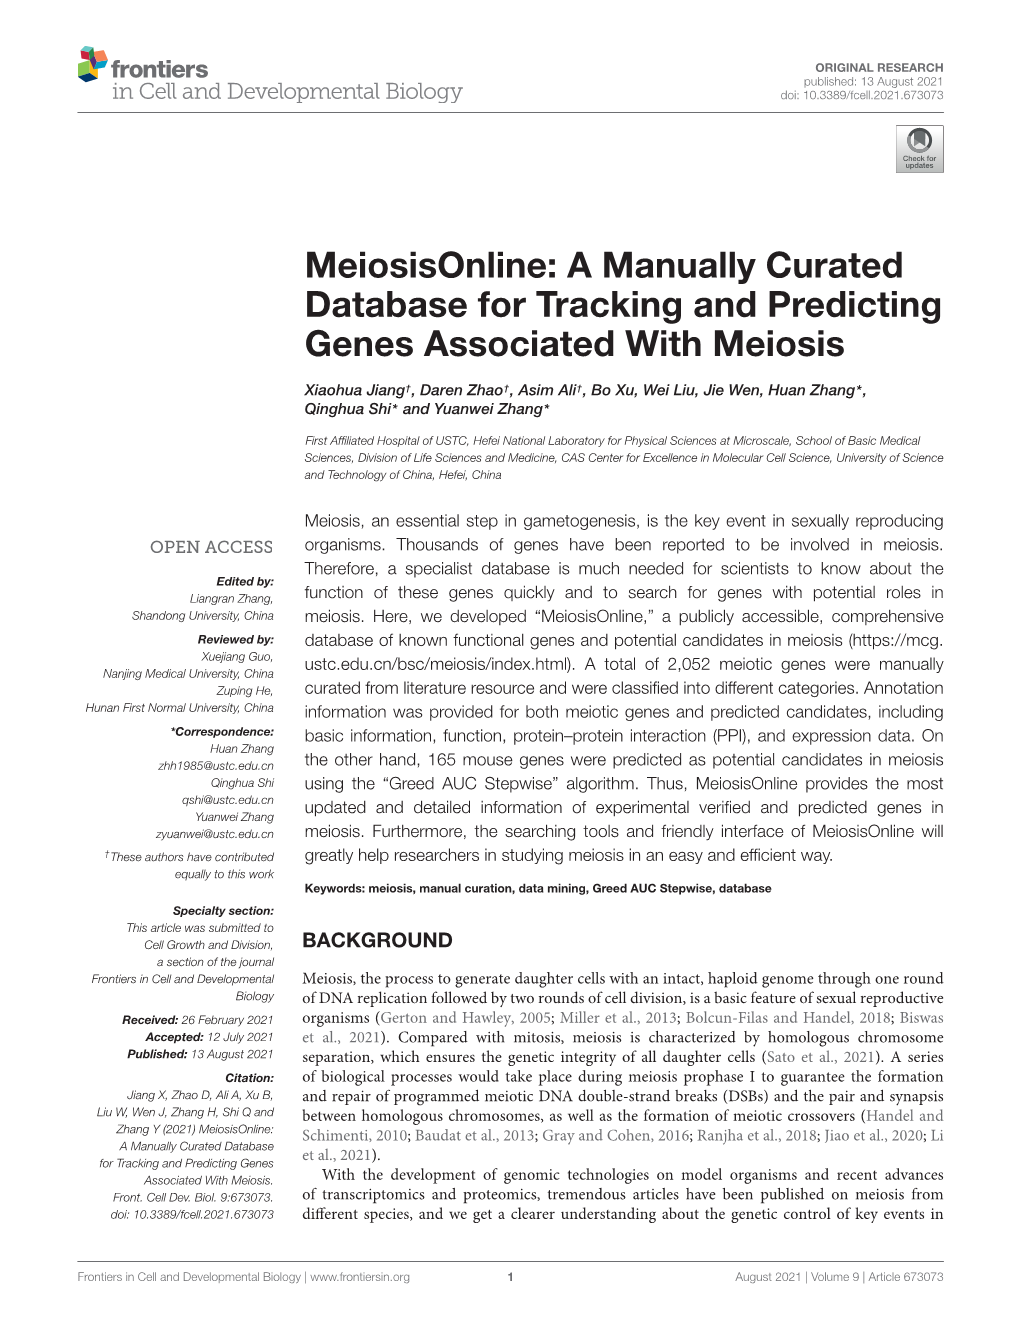 A Manually Curated Database for Tracking and Predicting Genes Associated with Meiosis